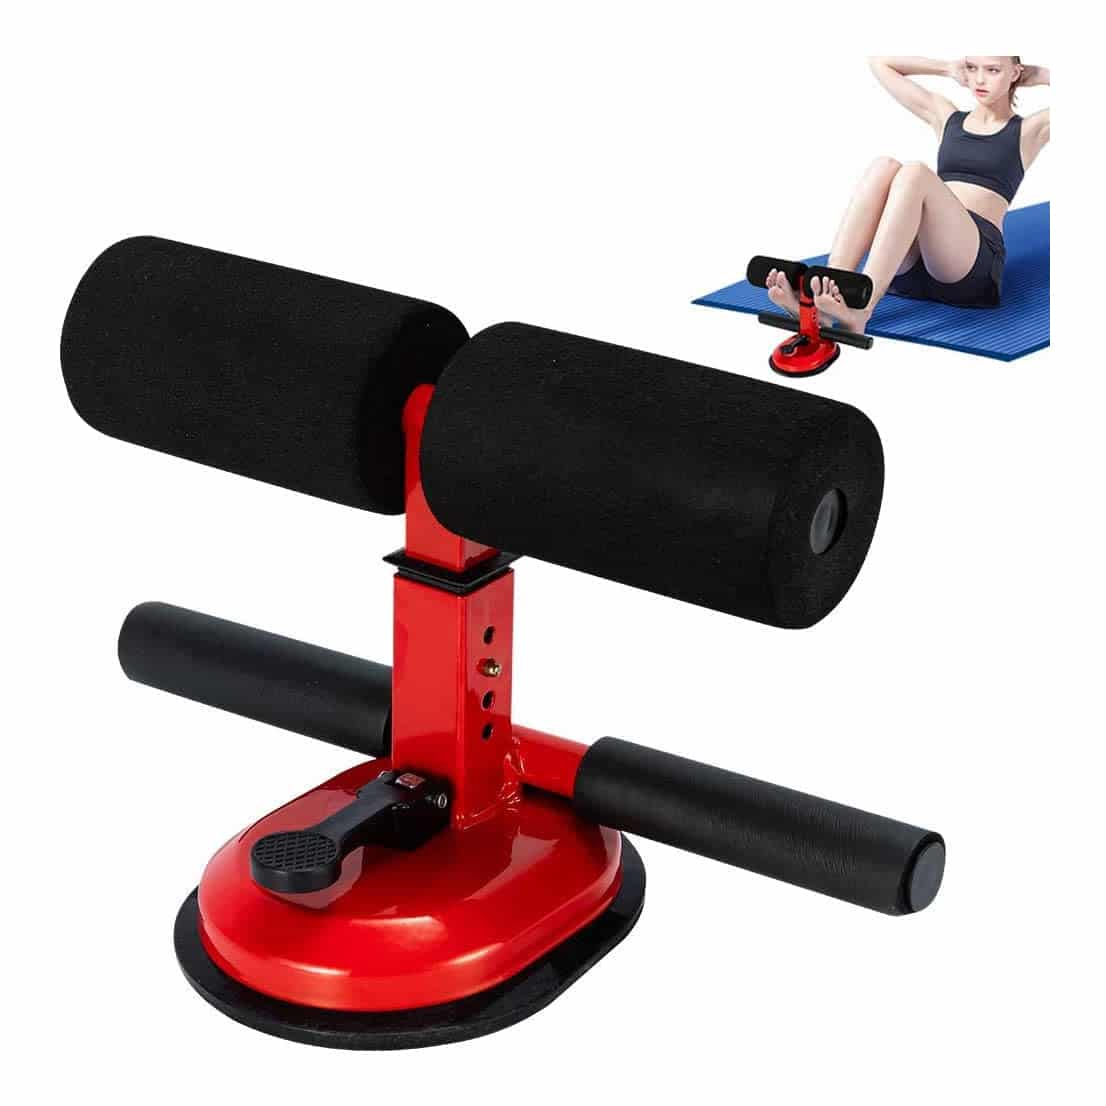 Top 10 Best Sit Up Bars in 2023 Reviews - Ten Top Product